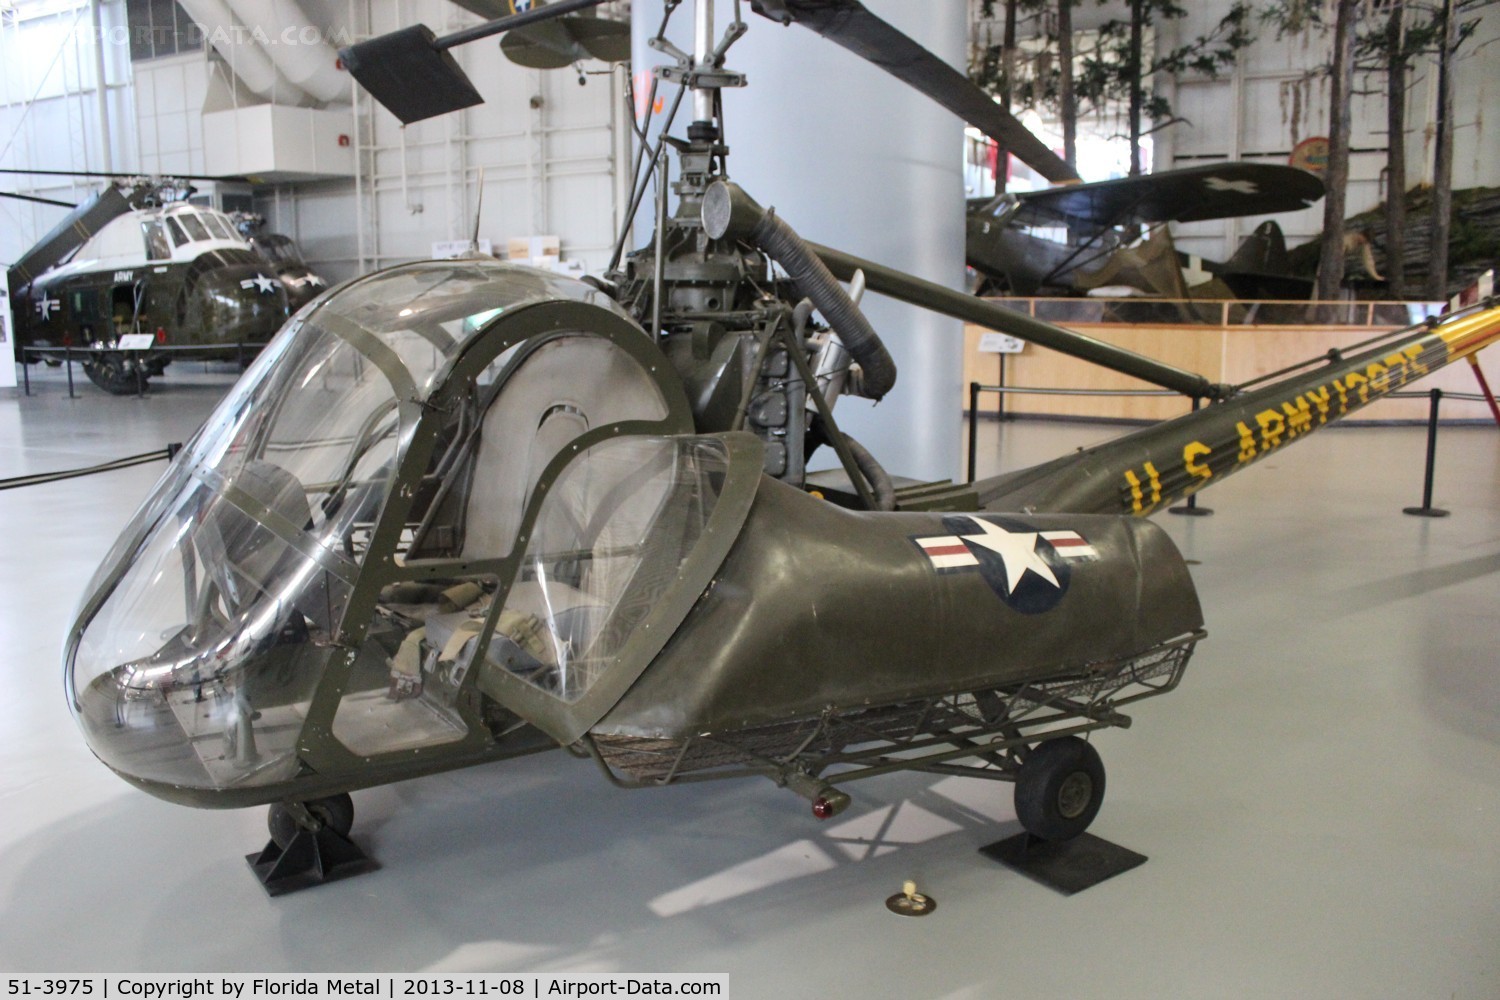 51-3975, 1951 Hiller UH-23B Raven C/N 188, UH-23 Raven at Army Aviation Museum